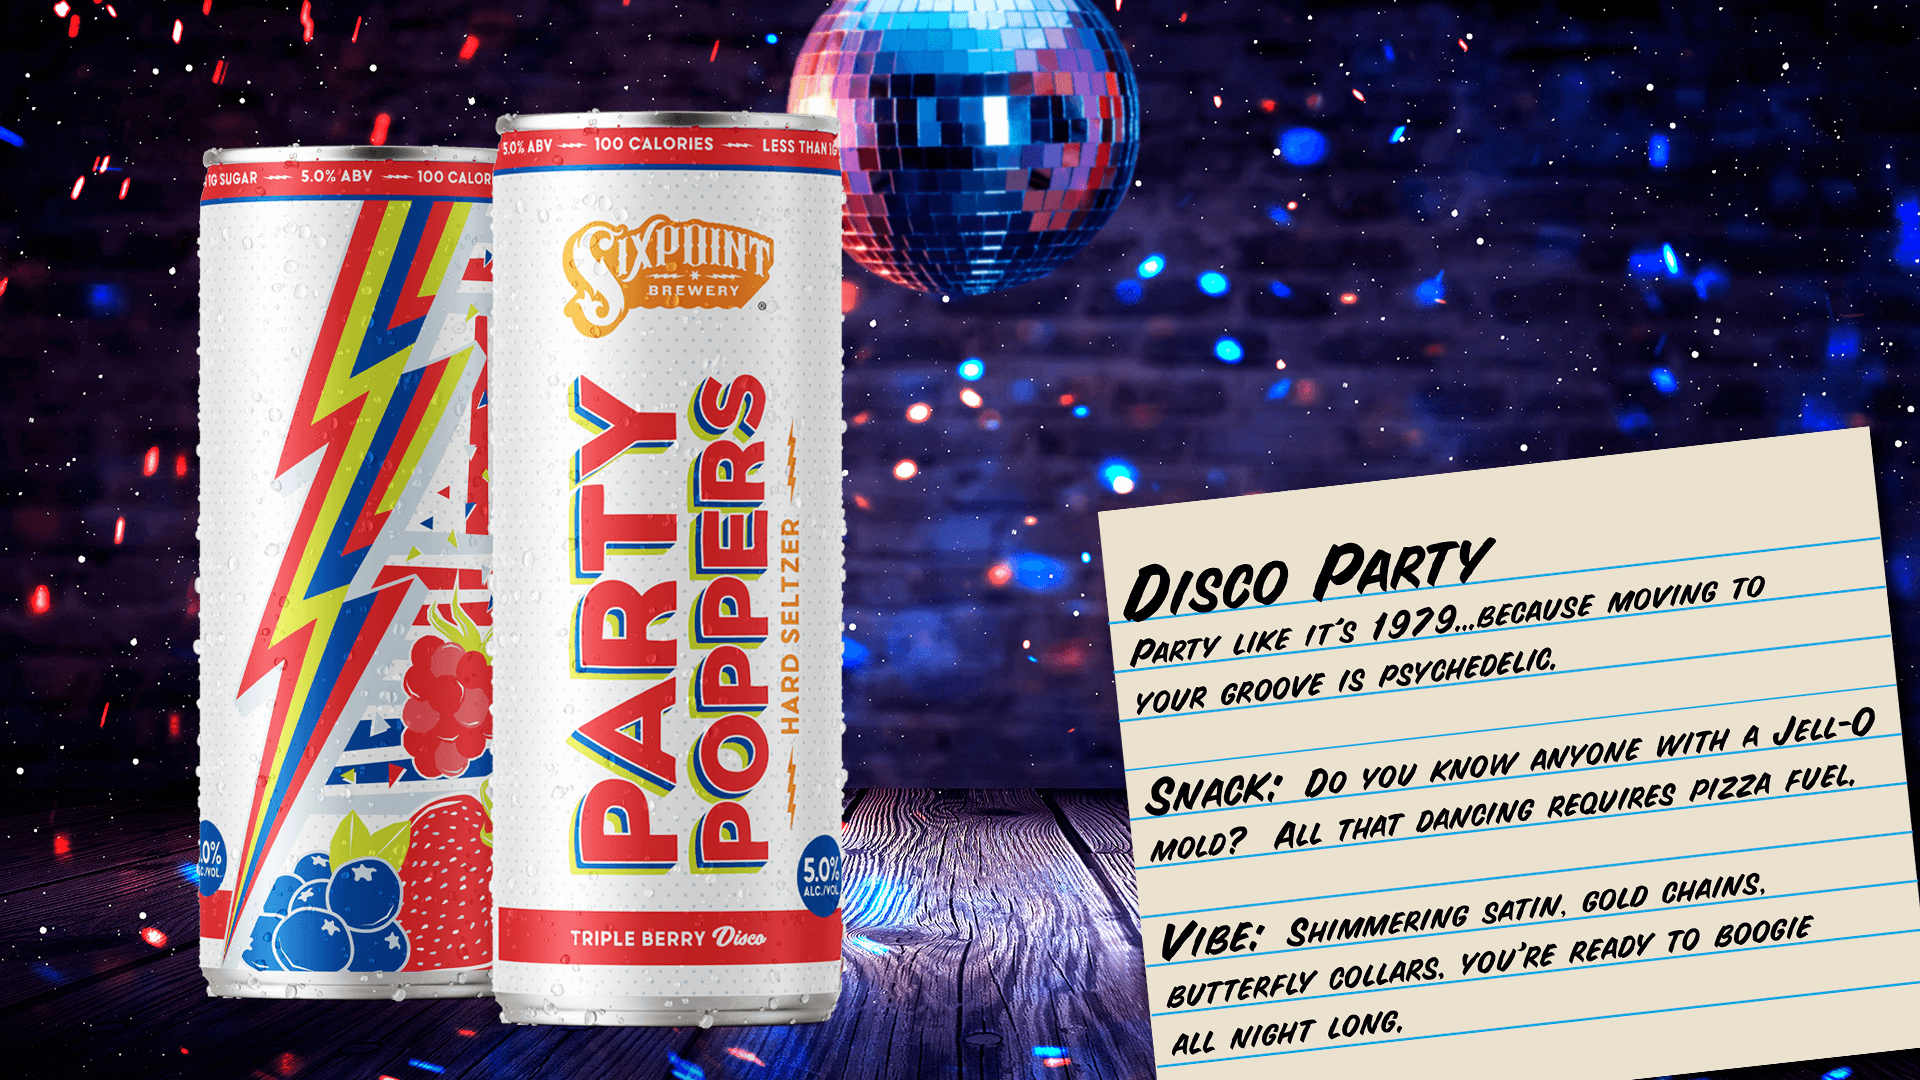  Disco:  Party like it’s 1979…because moving to your groove is psychedelic. Food:  Do you know anyone with a Jell-O mold?  All that dancing requires pizza fuel. Party Supplies: Shimmering satin, gold chains, butterfly collars, you're ready to boogie all night long.